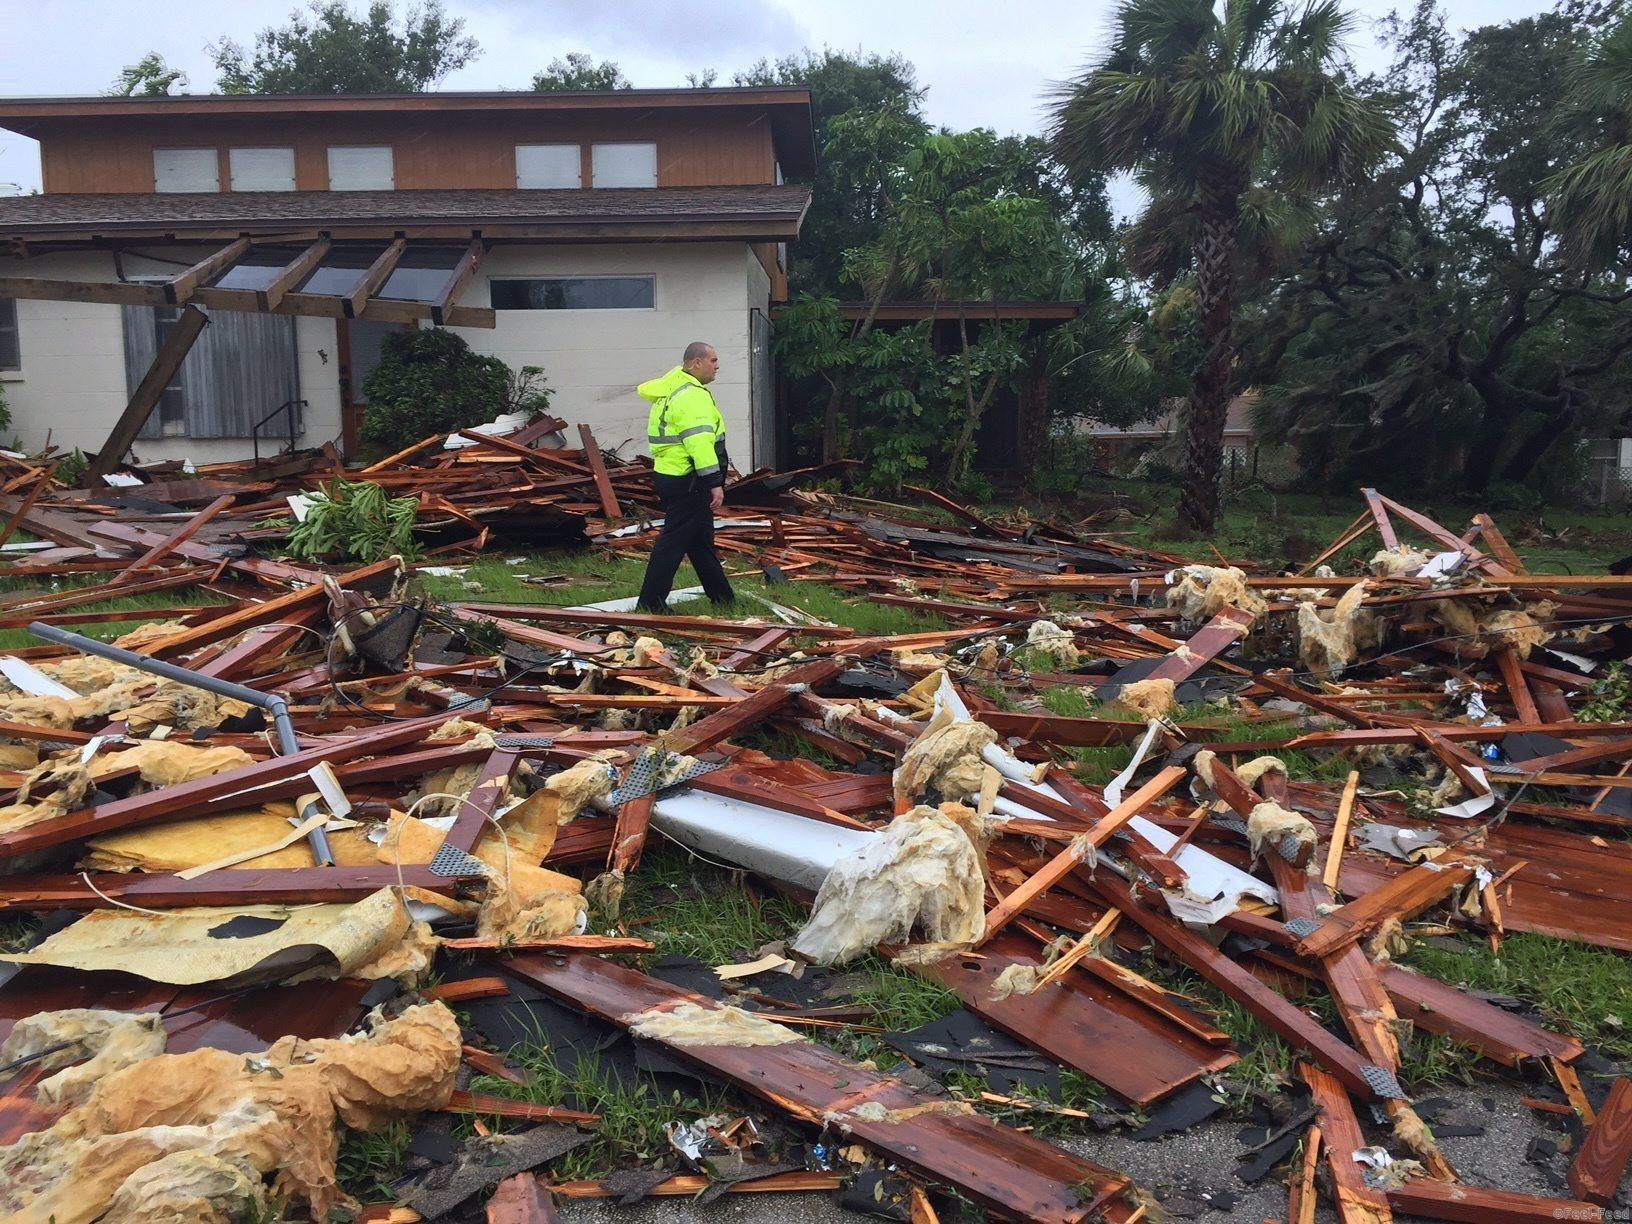 Palm Bay officer Dustin Terkoski walks over debris from a two-story home at Palm Point Subdivision in Brevard County, Fla., after a tornado touched down on Sunday, Sept. 10, 2017. (Red Huber/Orlando Sentinel via AP)